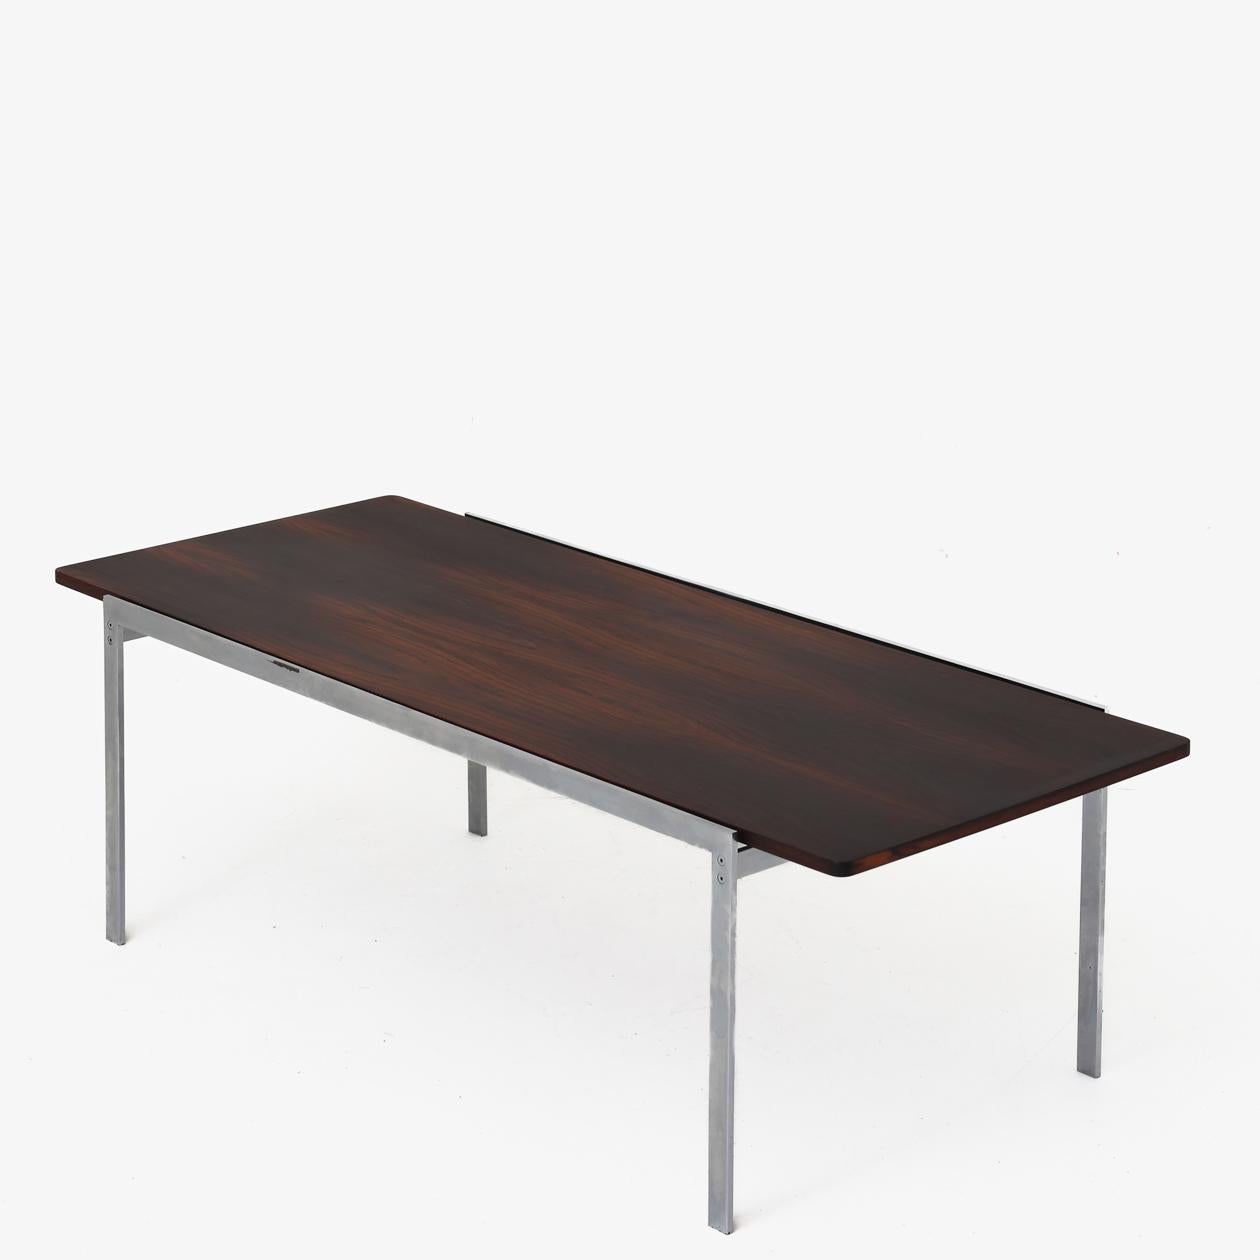 Rectangular coffee table with rosewood top and chromed steel frame. Arne Jacobsen / Fritz Hansen